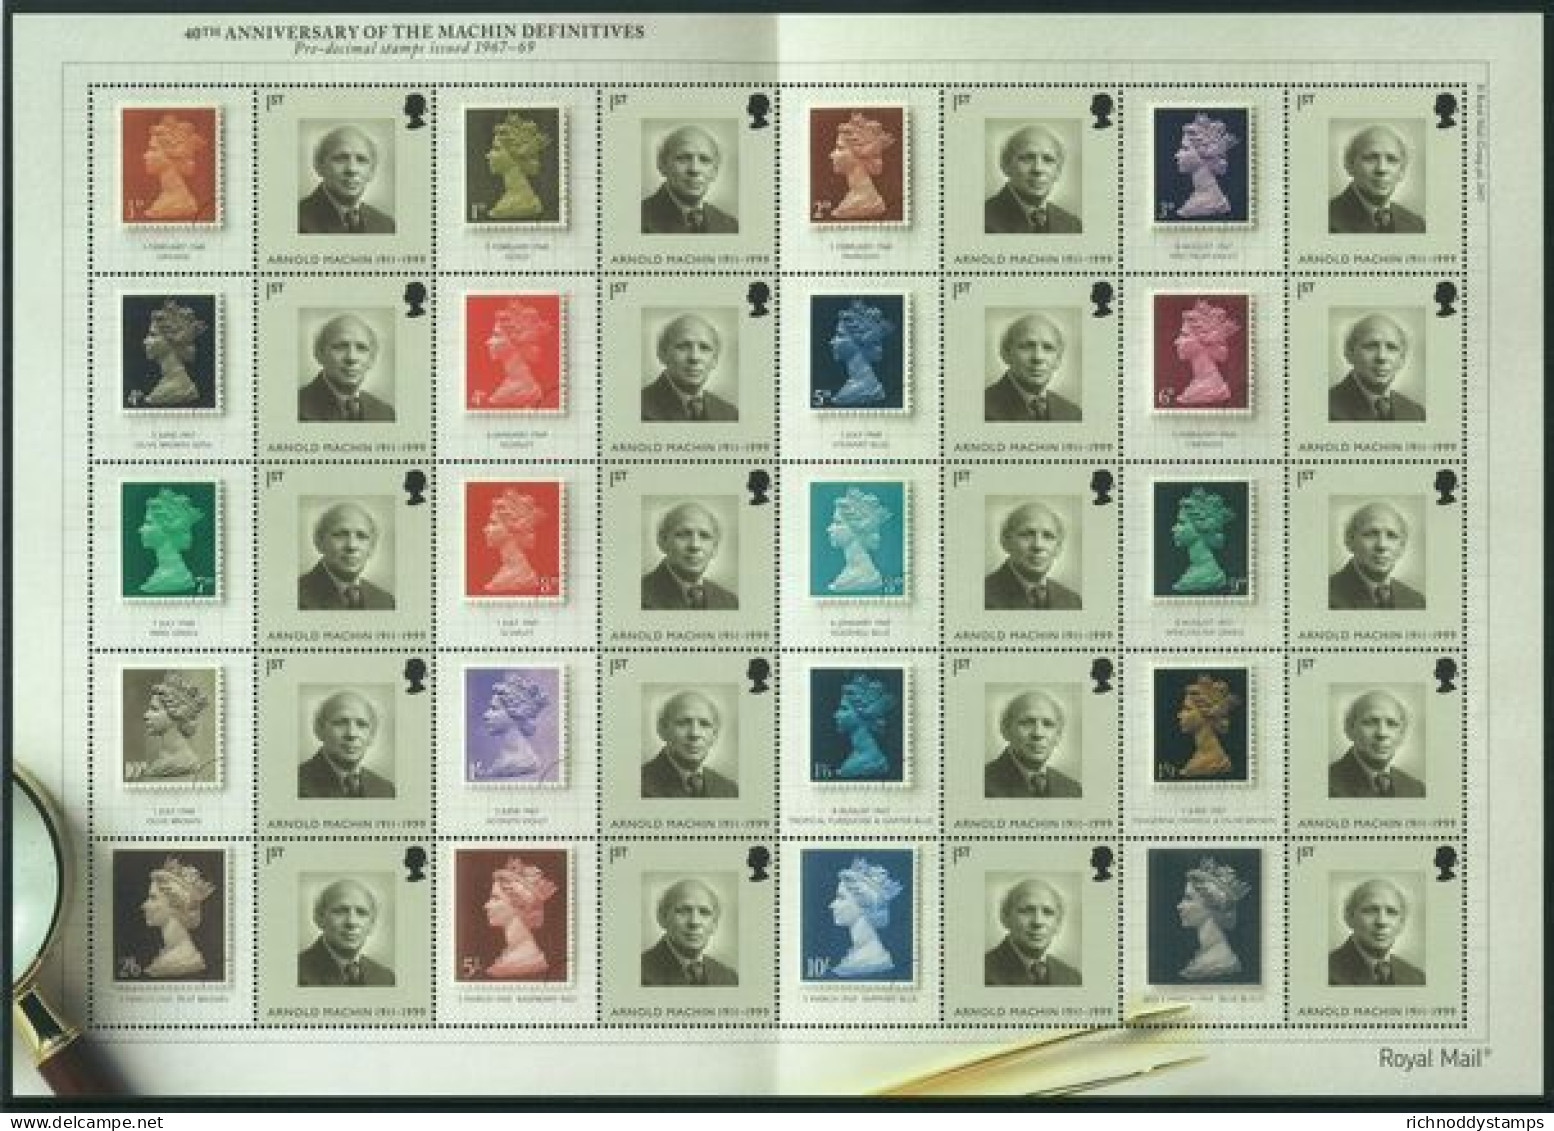 2007 40th Anniversay Of The First Machin Definitive Smilers Sheet Unmounted Mint.  - Timbres Personnalisés